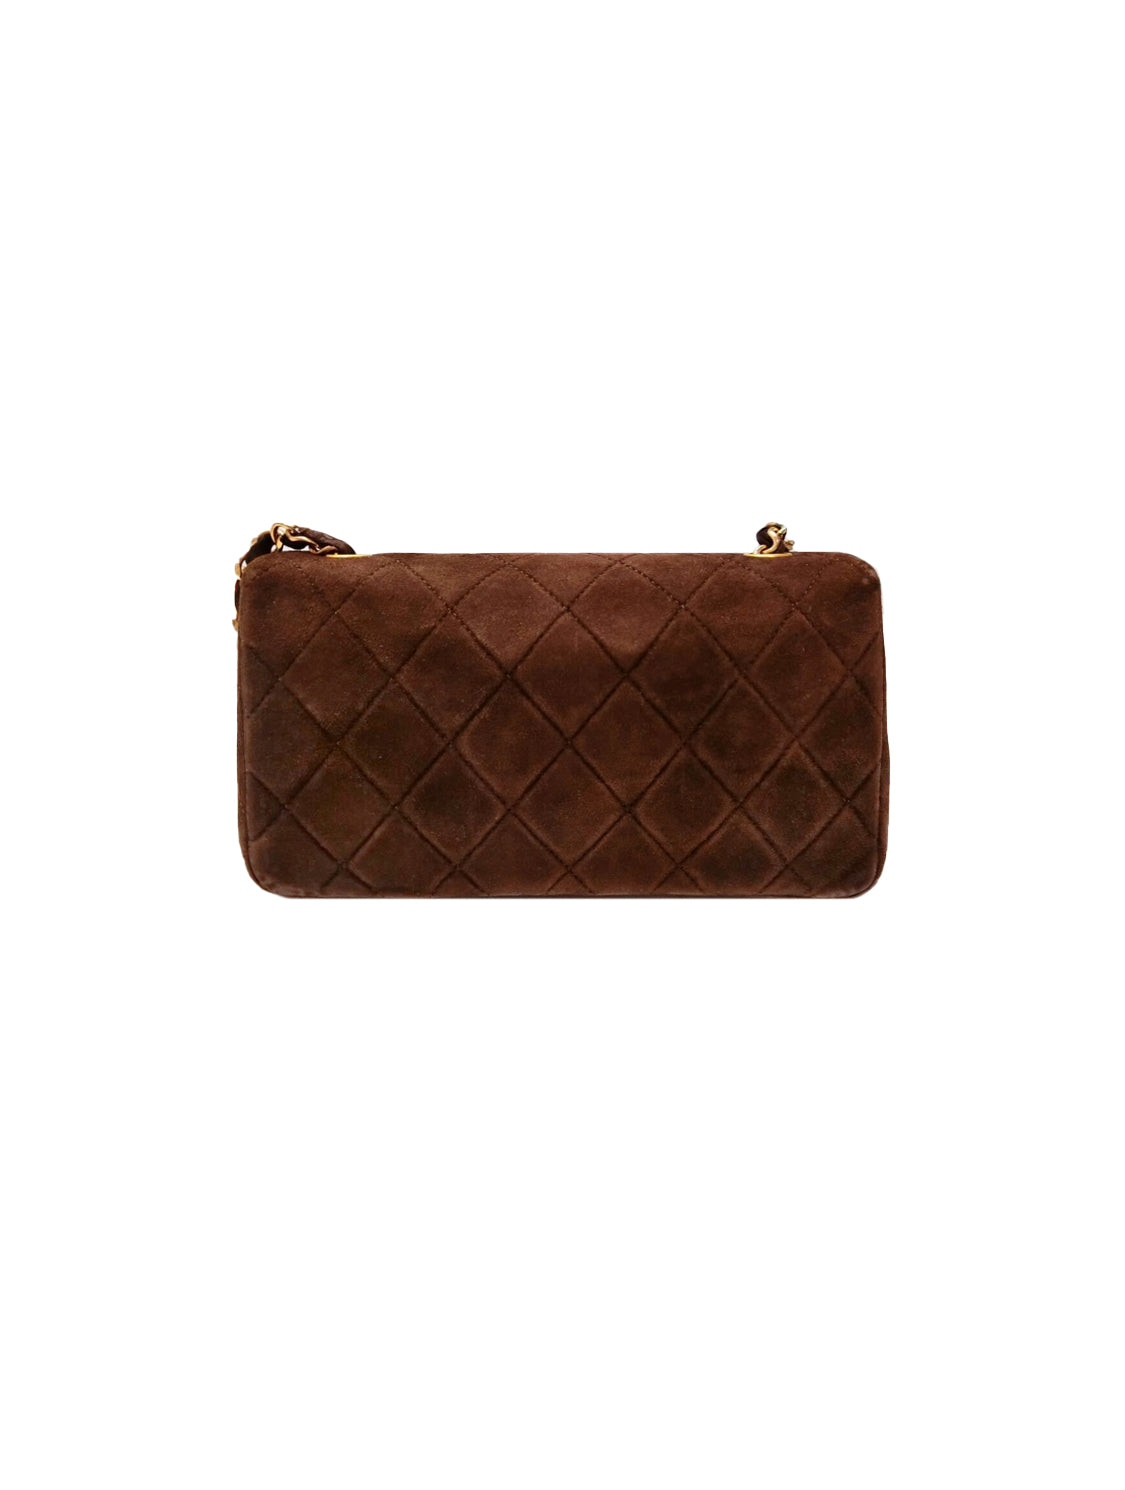 Chanel 2000s Brown Suede Gold Hardware Flap